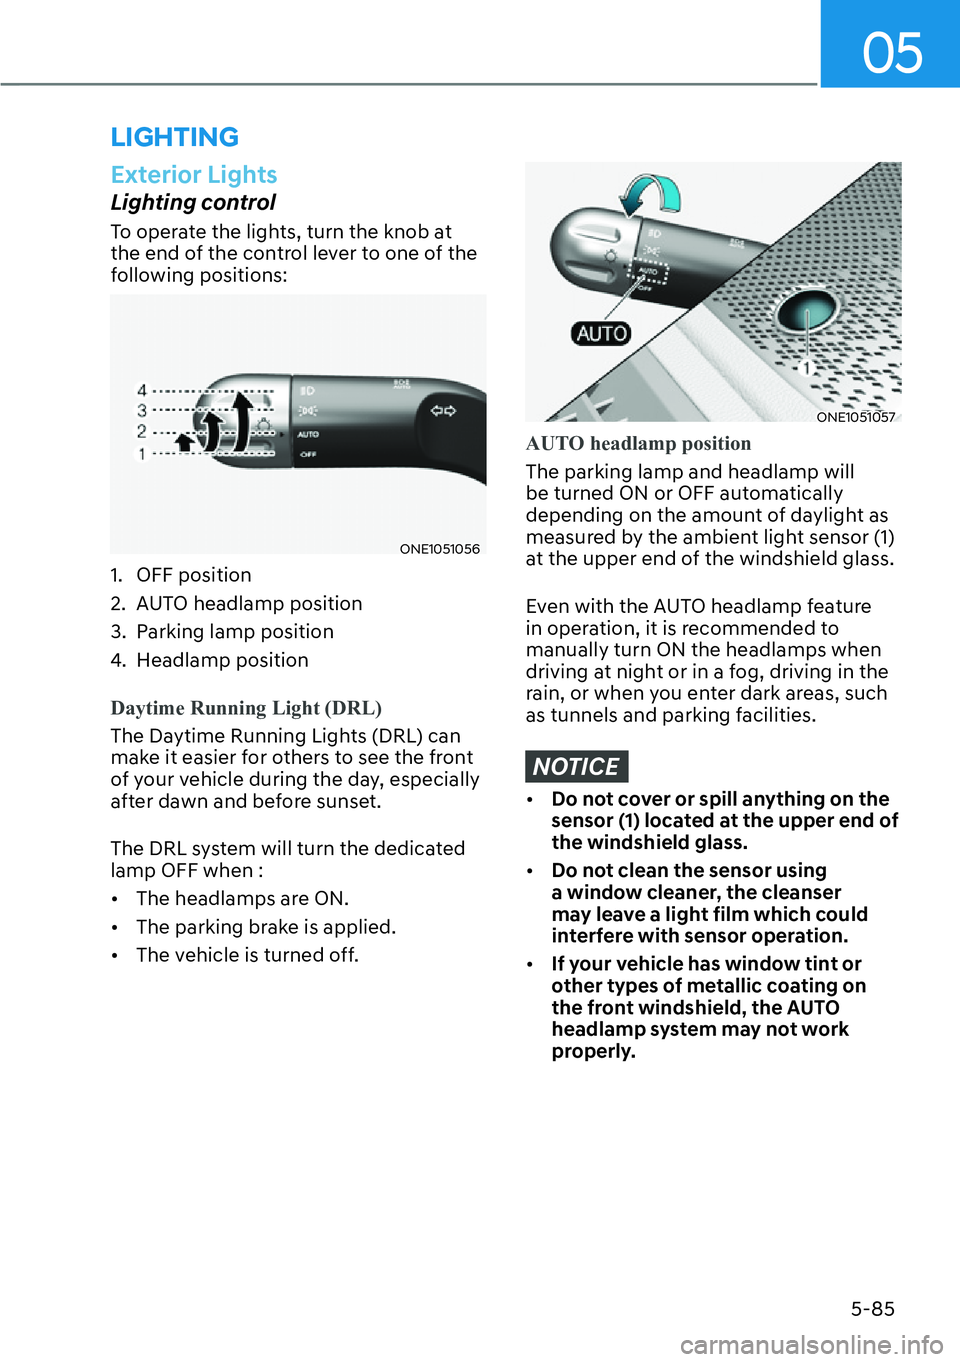 HYUNDAI IONIQ 5 2022  Owners Manual 05
5-85
Exterior Lights
Lighting control
To operate the lights, turn the knob at 
the end of the control lever to one of the 
following positions:
ONE1051056
1. OFF position
2.  AUTO headlamp position